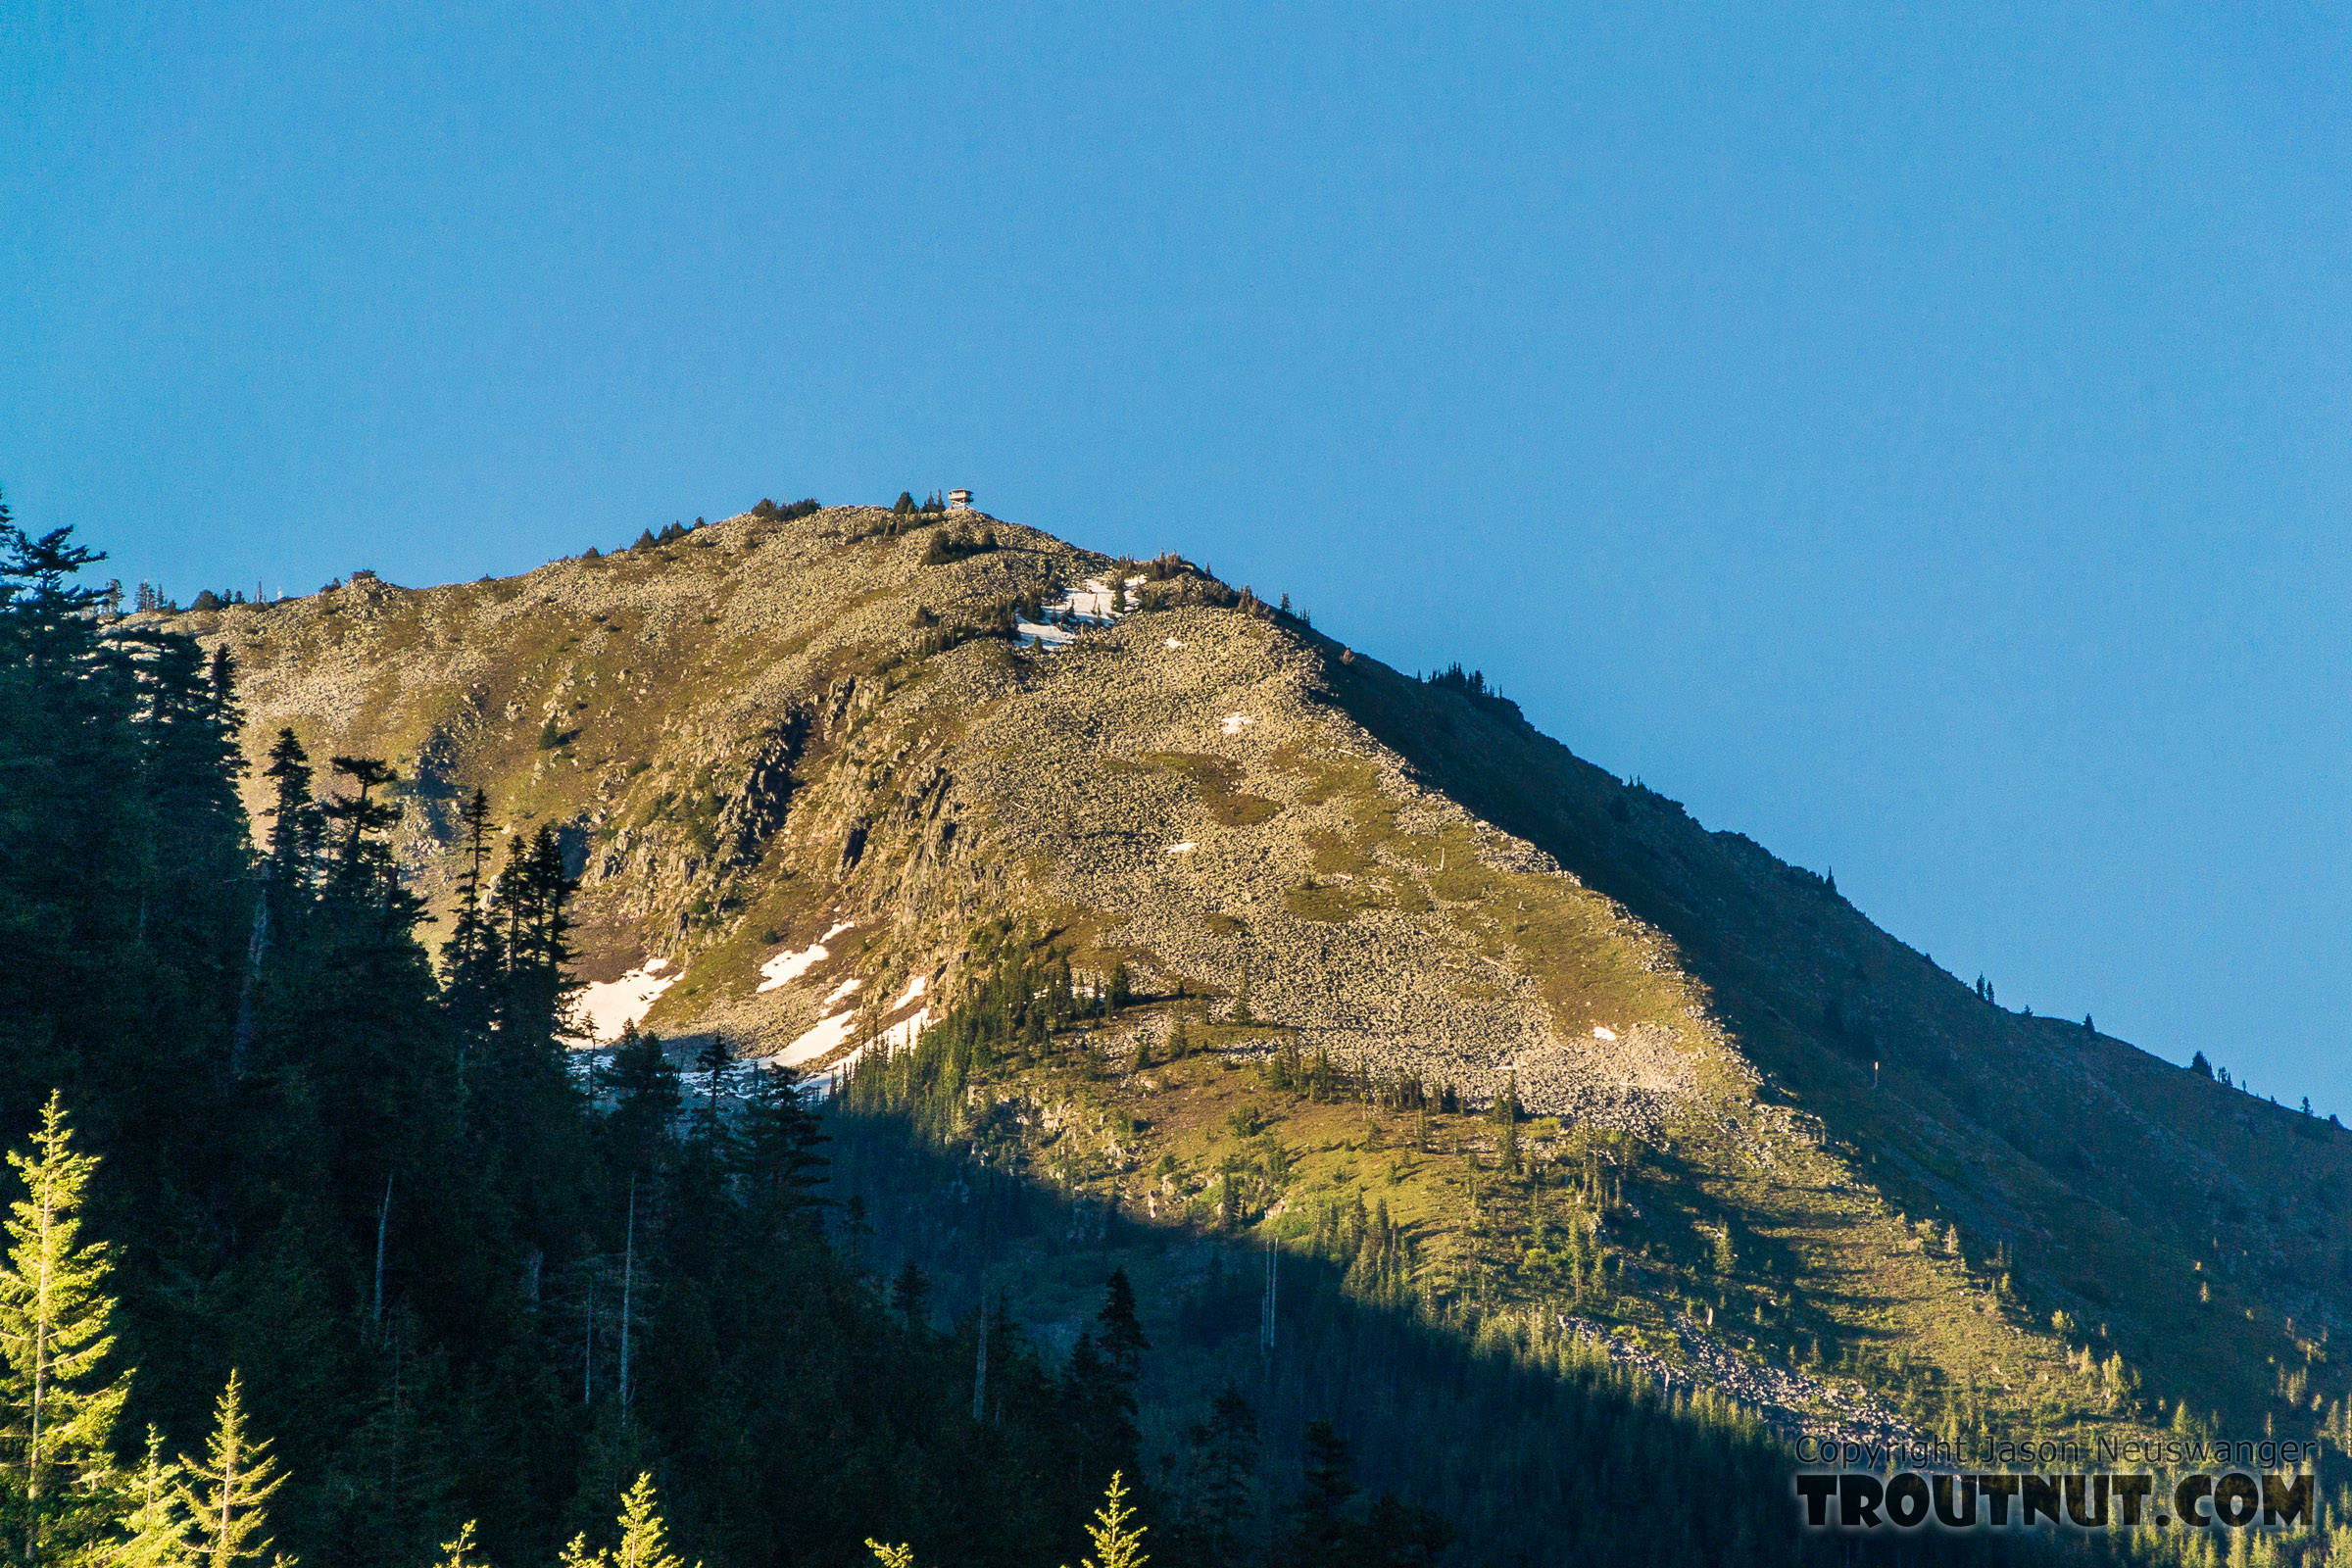 Granite Mountain with Granite Mountain Lookout tower on top From the South Fork Snoqualmie River in Washington.